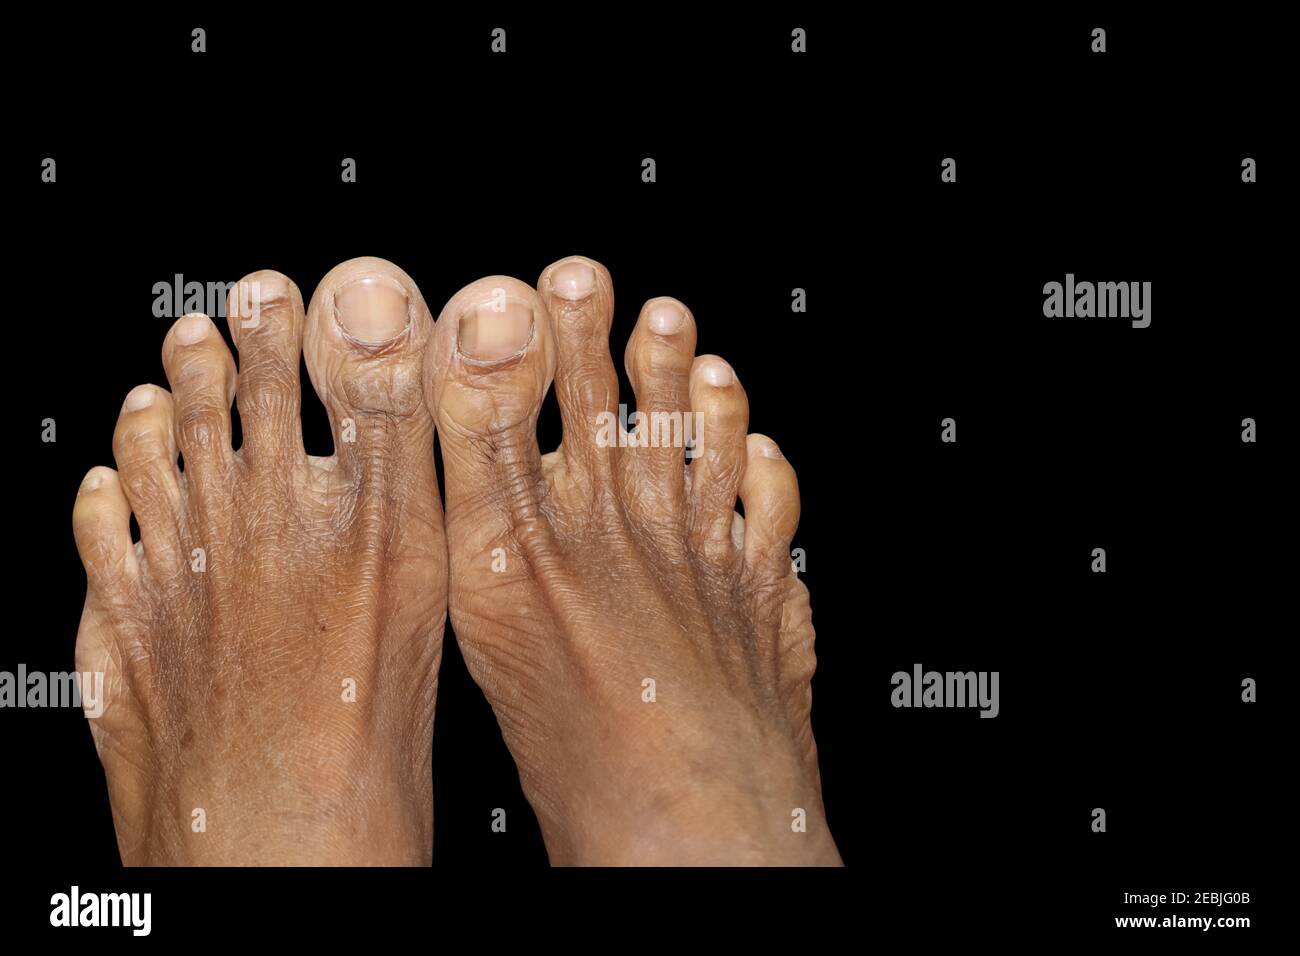 Closeup Image Of Human Male Feet In Isolated Black Background Stock Photo